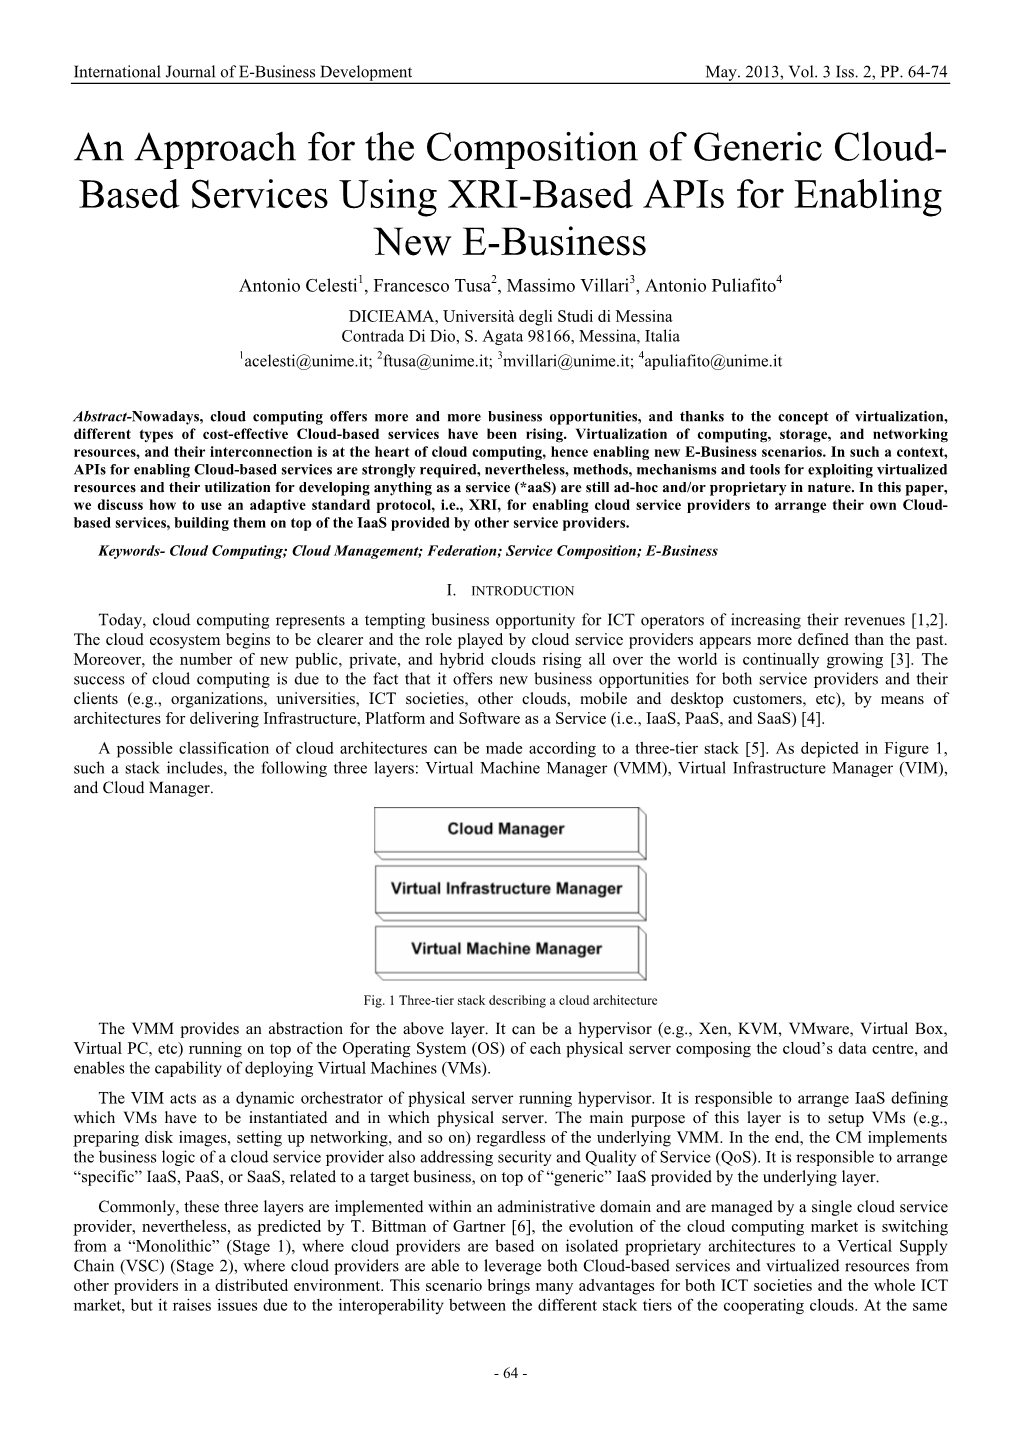 Based Services Using XRI-Based Apis for Enabling New E-Business